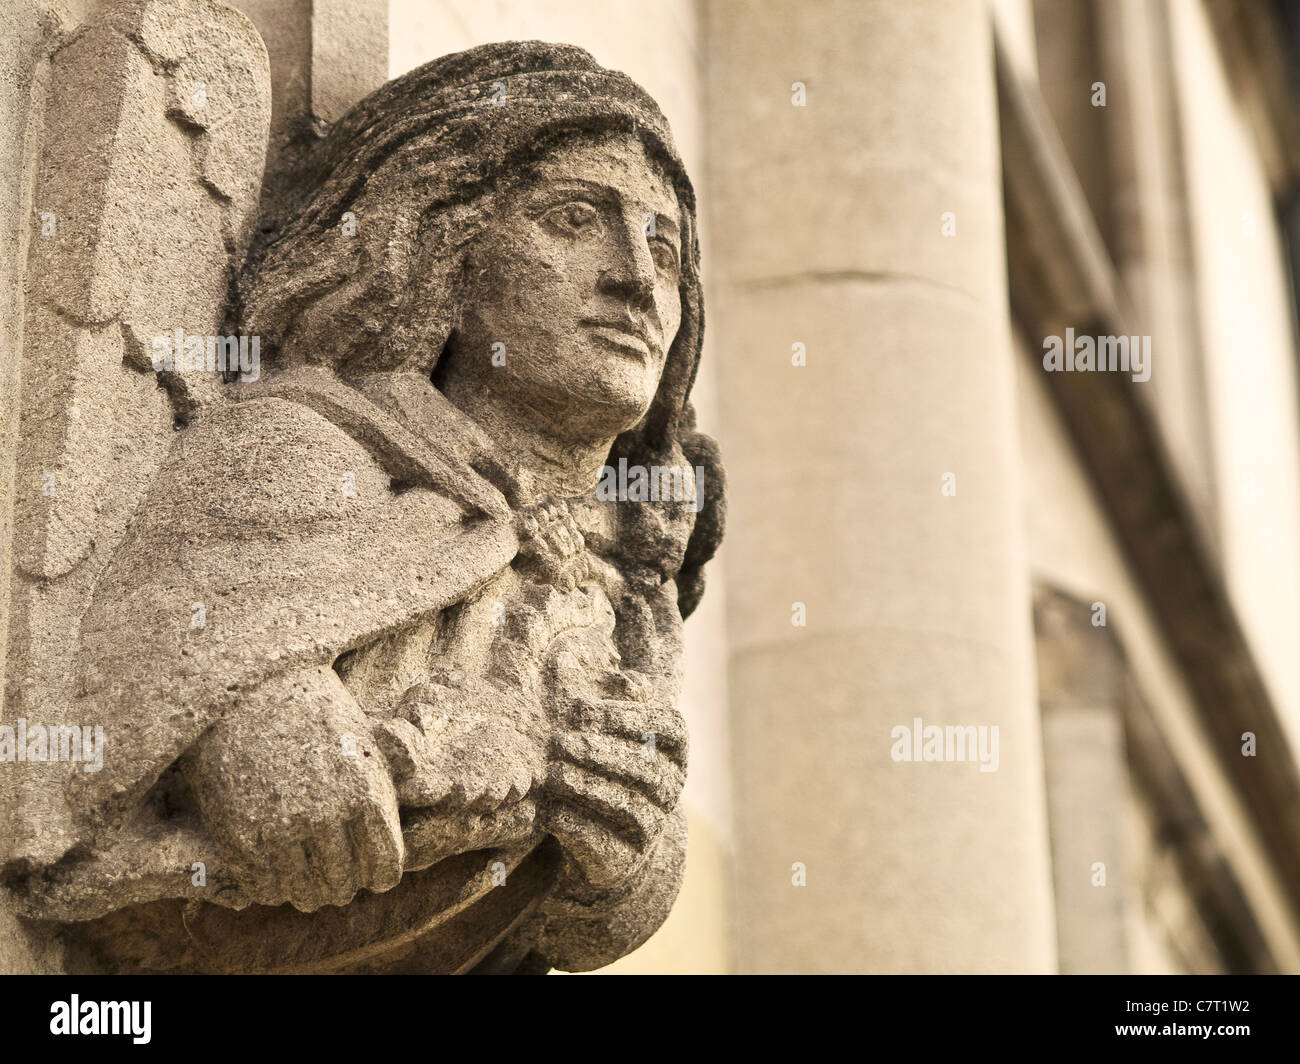 Angel stone figure in an old house of Oxford, England, Europe Stock Photo